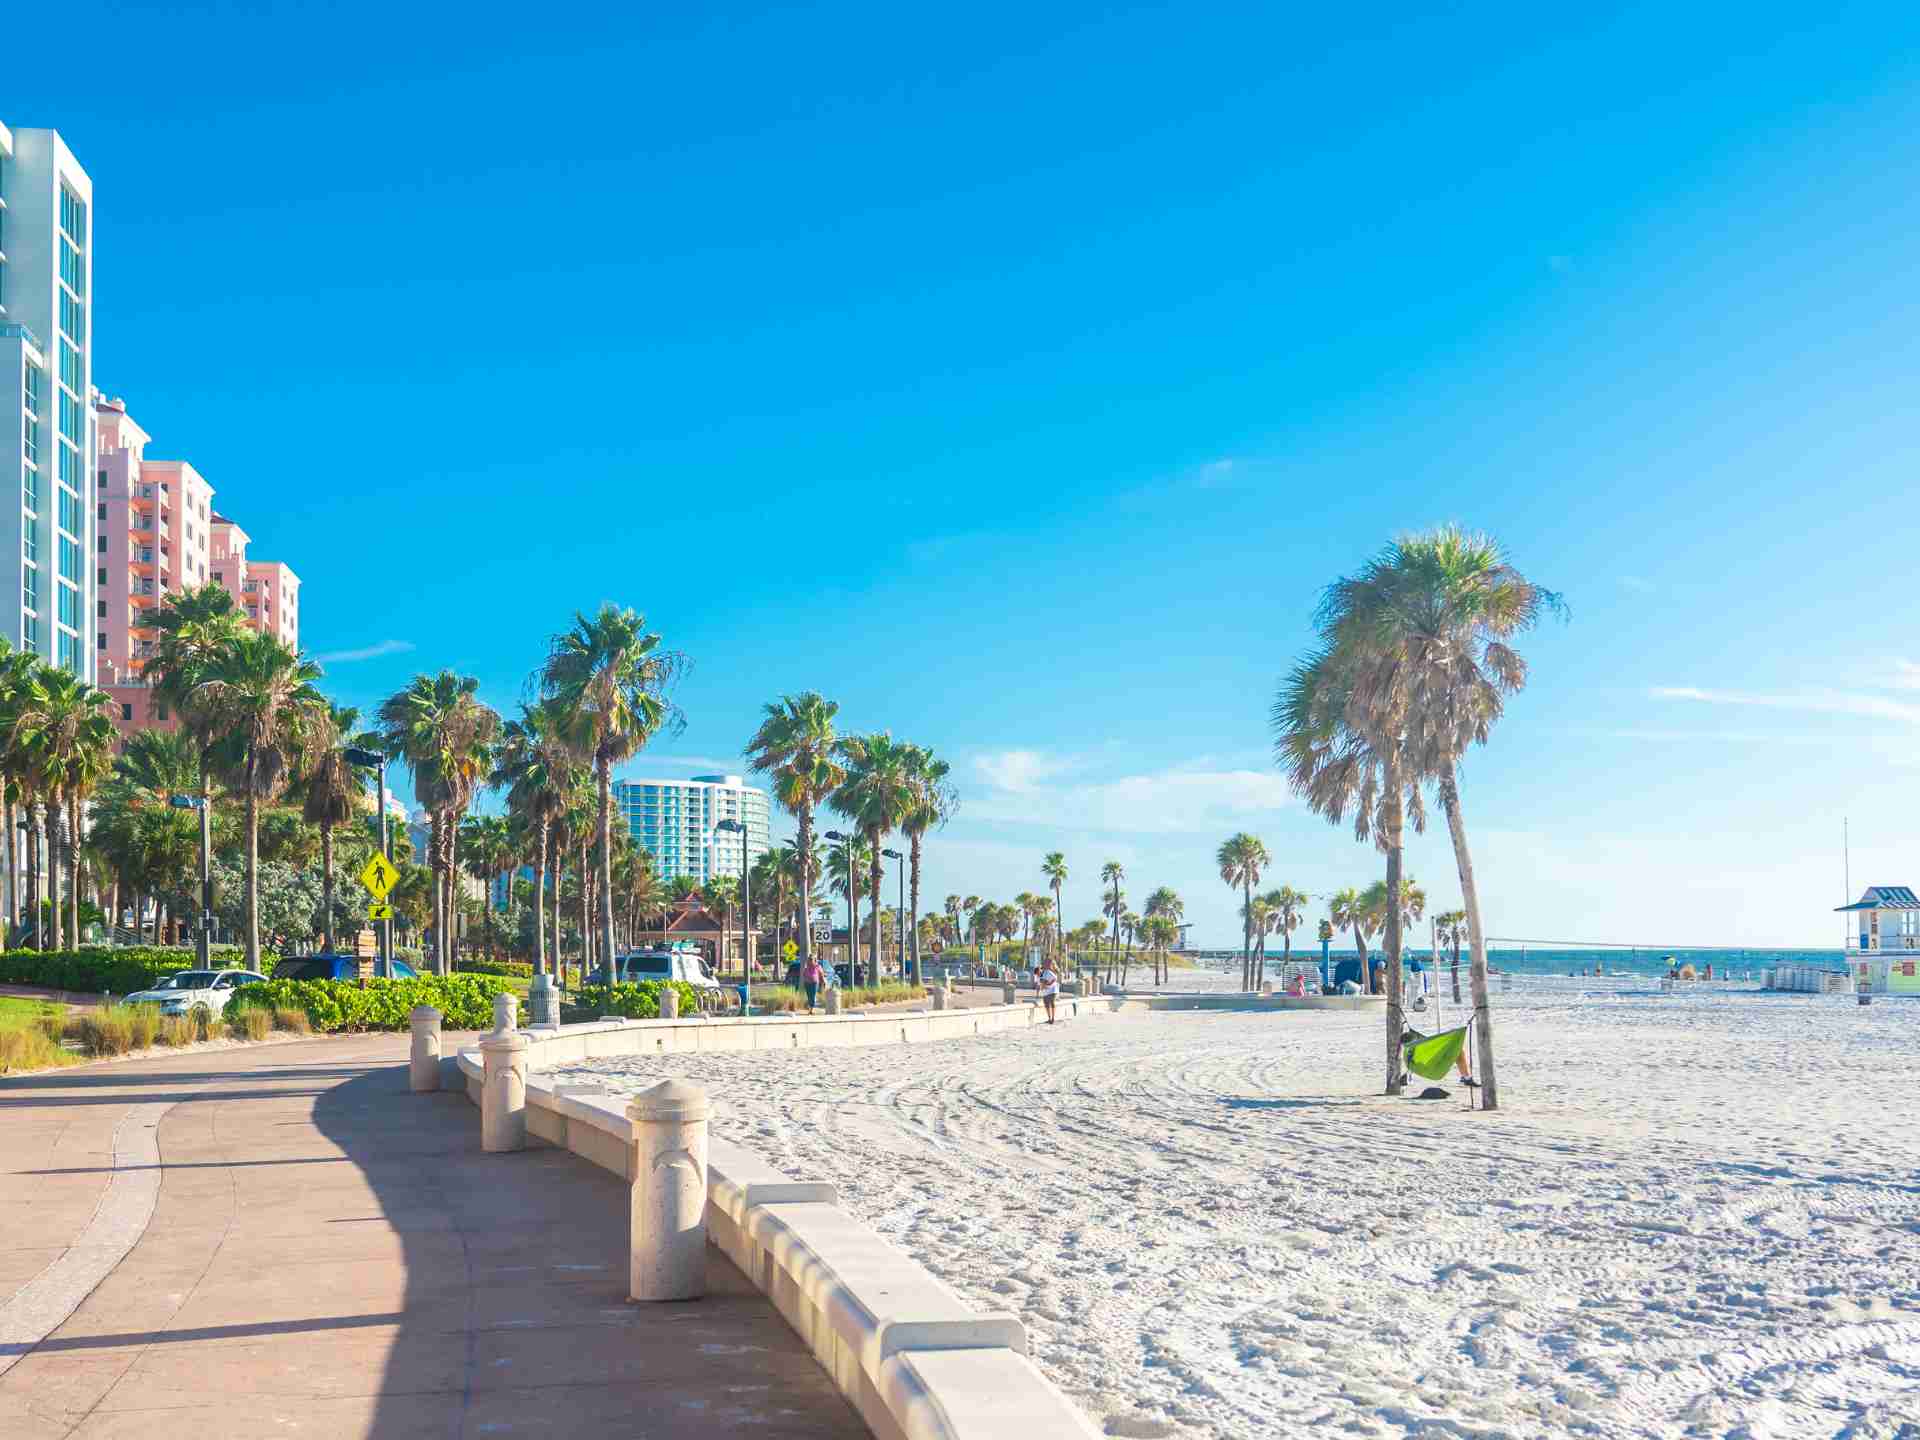 15 Things to Do in St. Petersburg & Clearwater: The Sunshine Capital